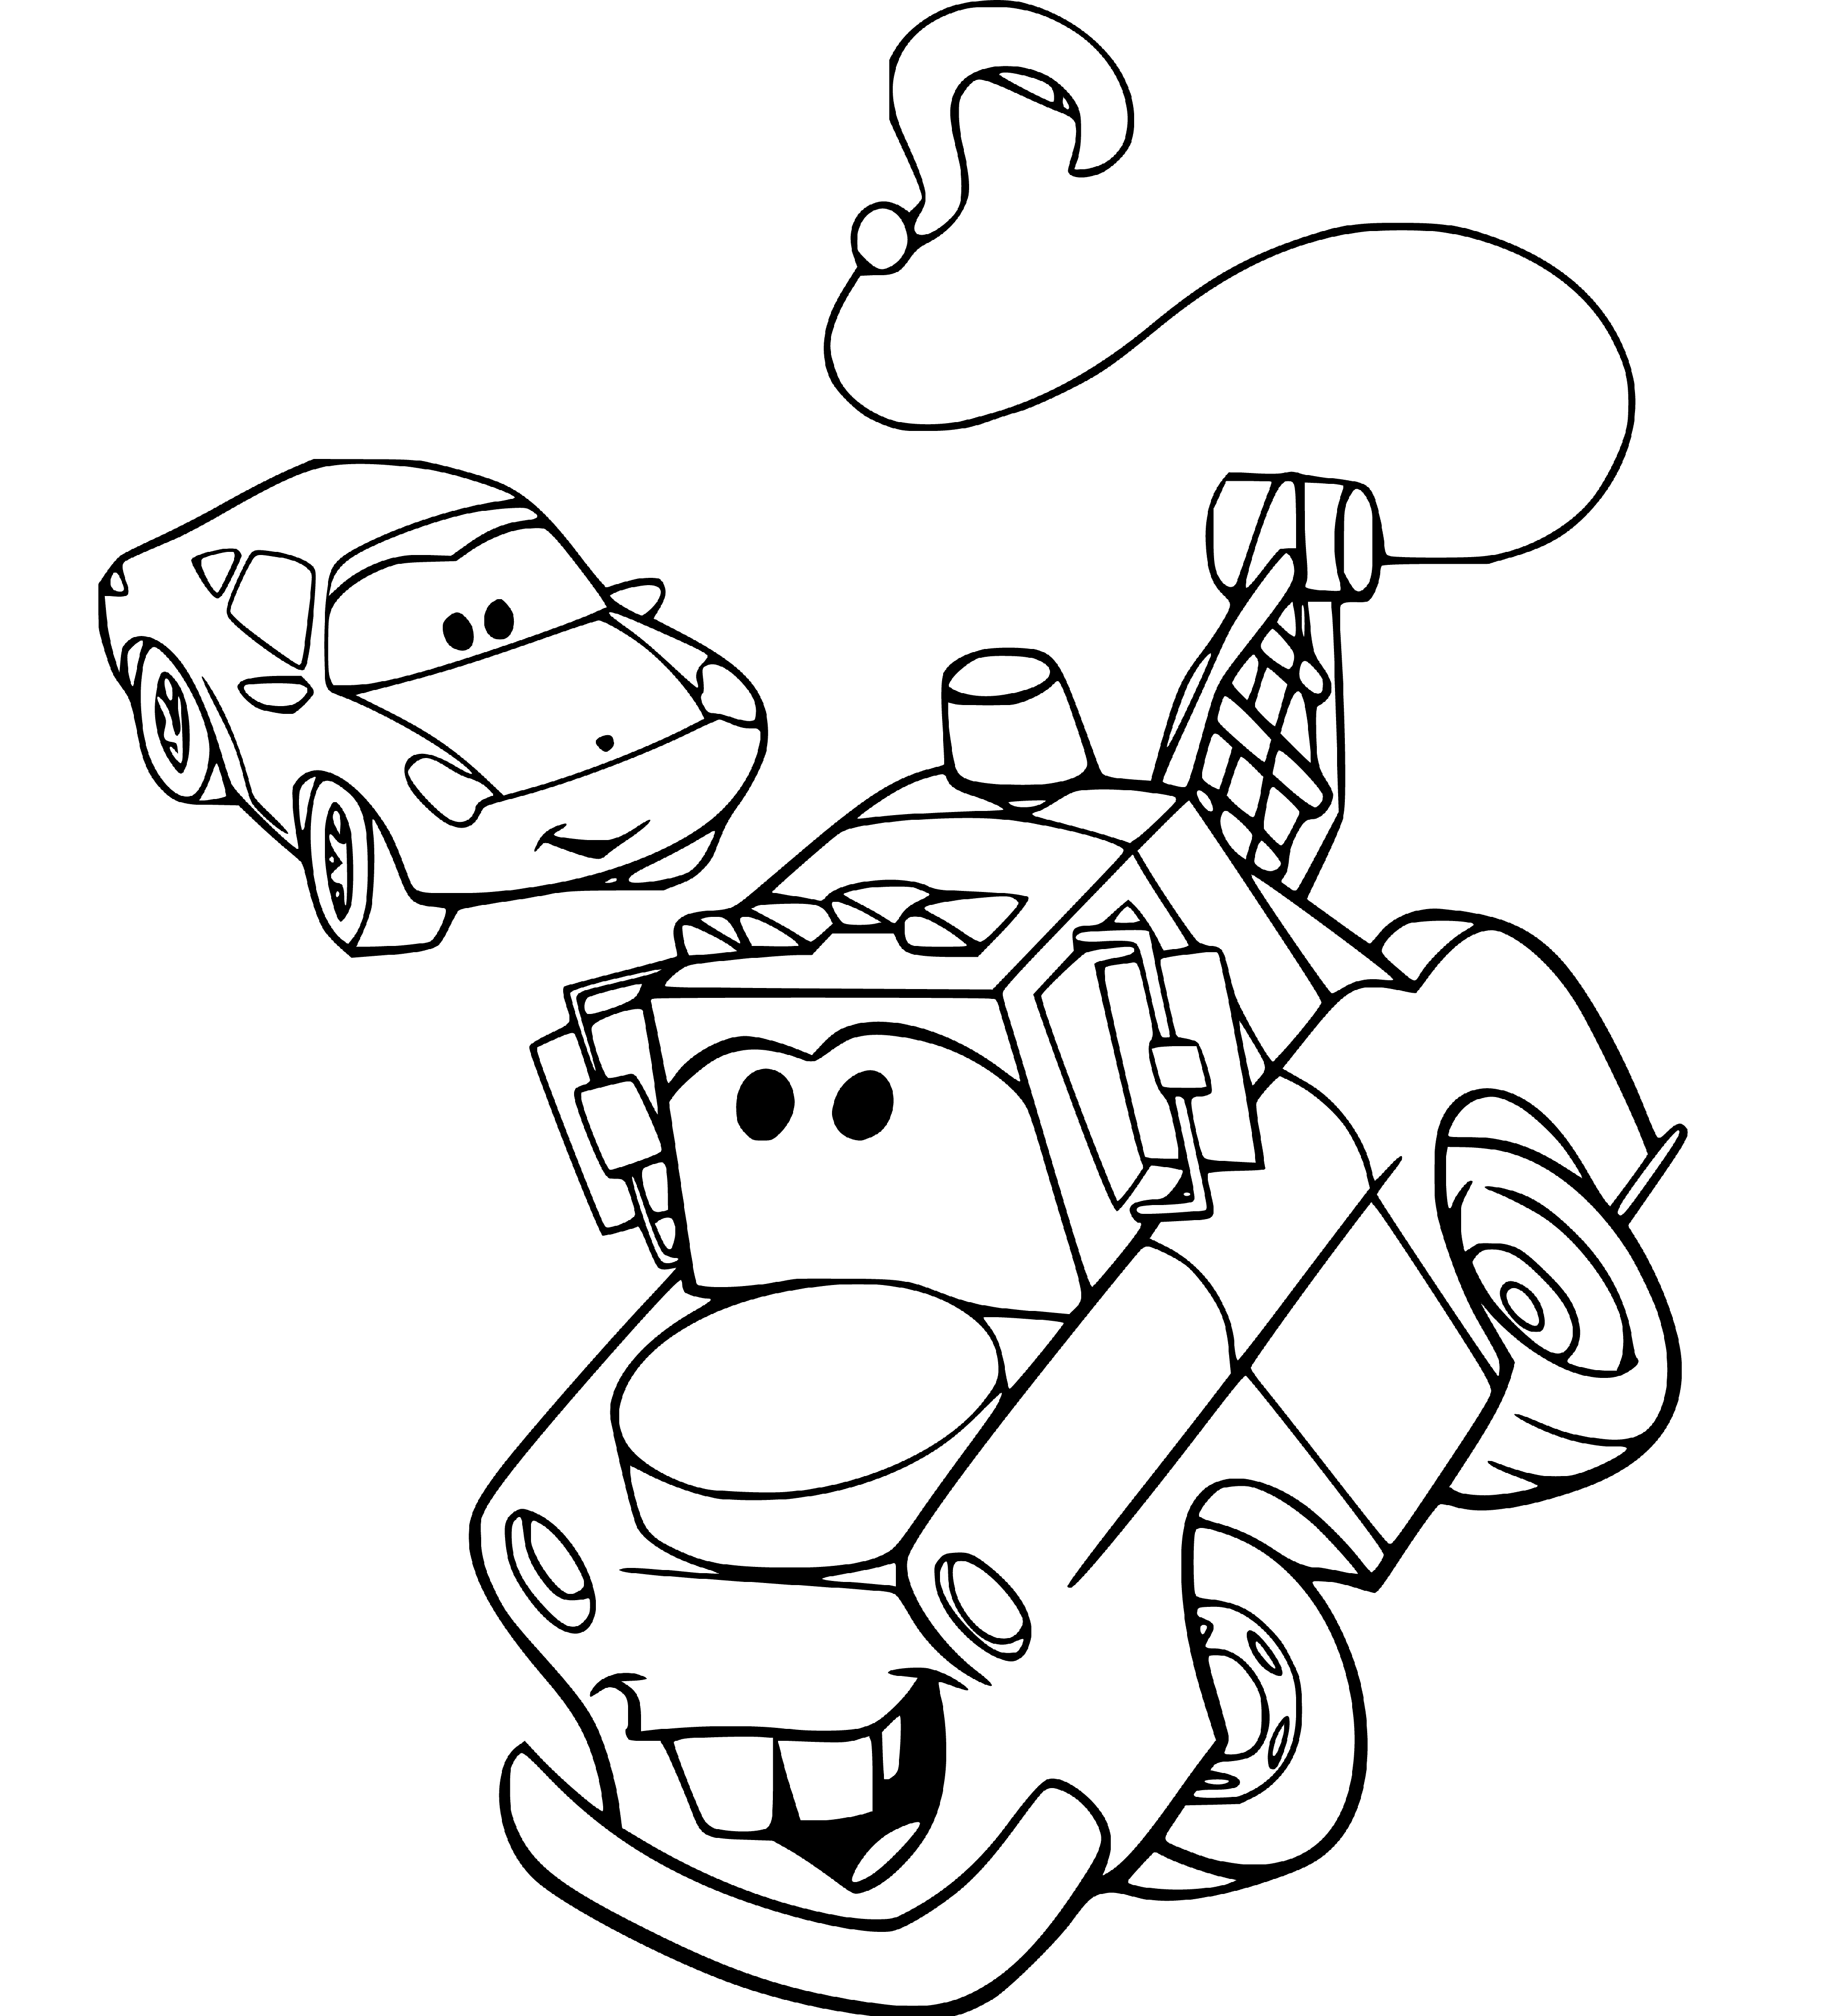 Cars on the Road Coloring Page for Kids - SheetalColor.com